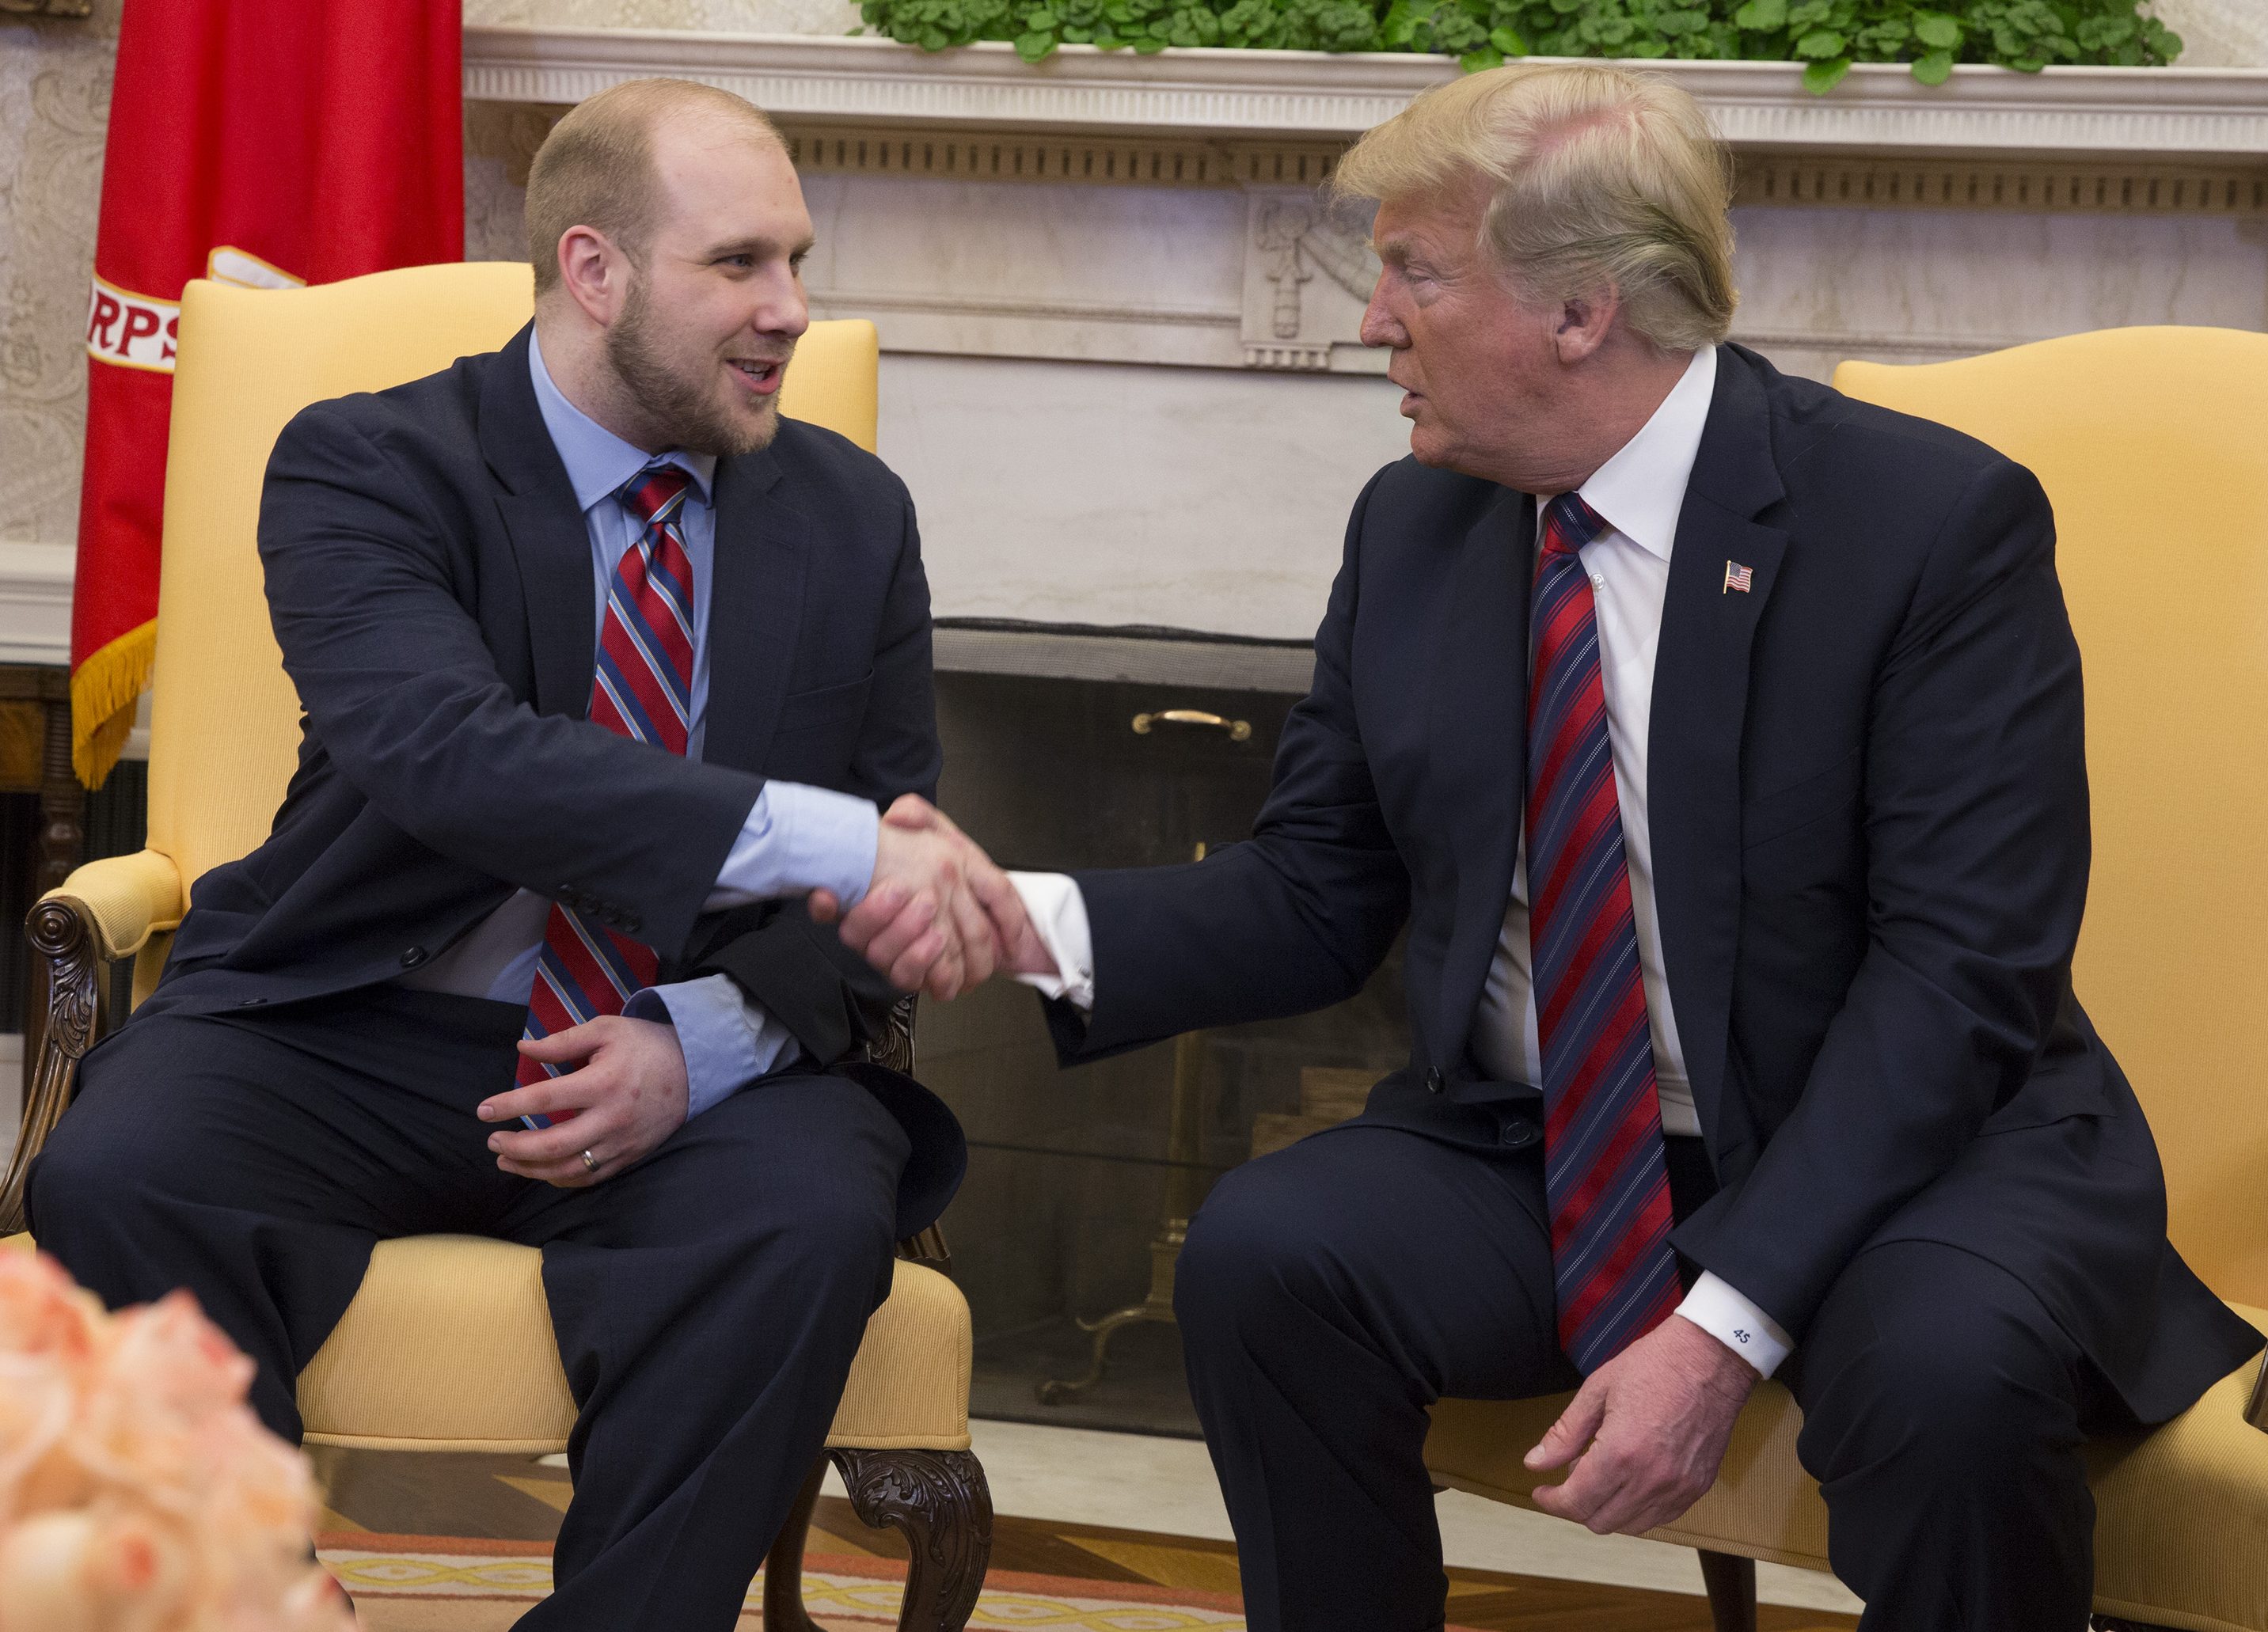 U.S. President Donald Trump shake hands during a meeting with Joshua Holt after his return to the U.S. at the White House on May 26, 2018 in Washington, DC. Holt, who had been imprisoned in Venezuela for two years, was released following diplomat efforts by the Trump and Obama administrations. (Photo by Chris Kleponis - Pool/Getty Images)